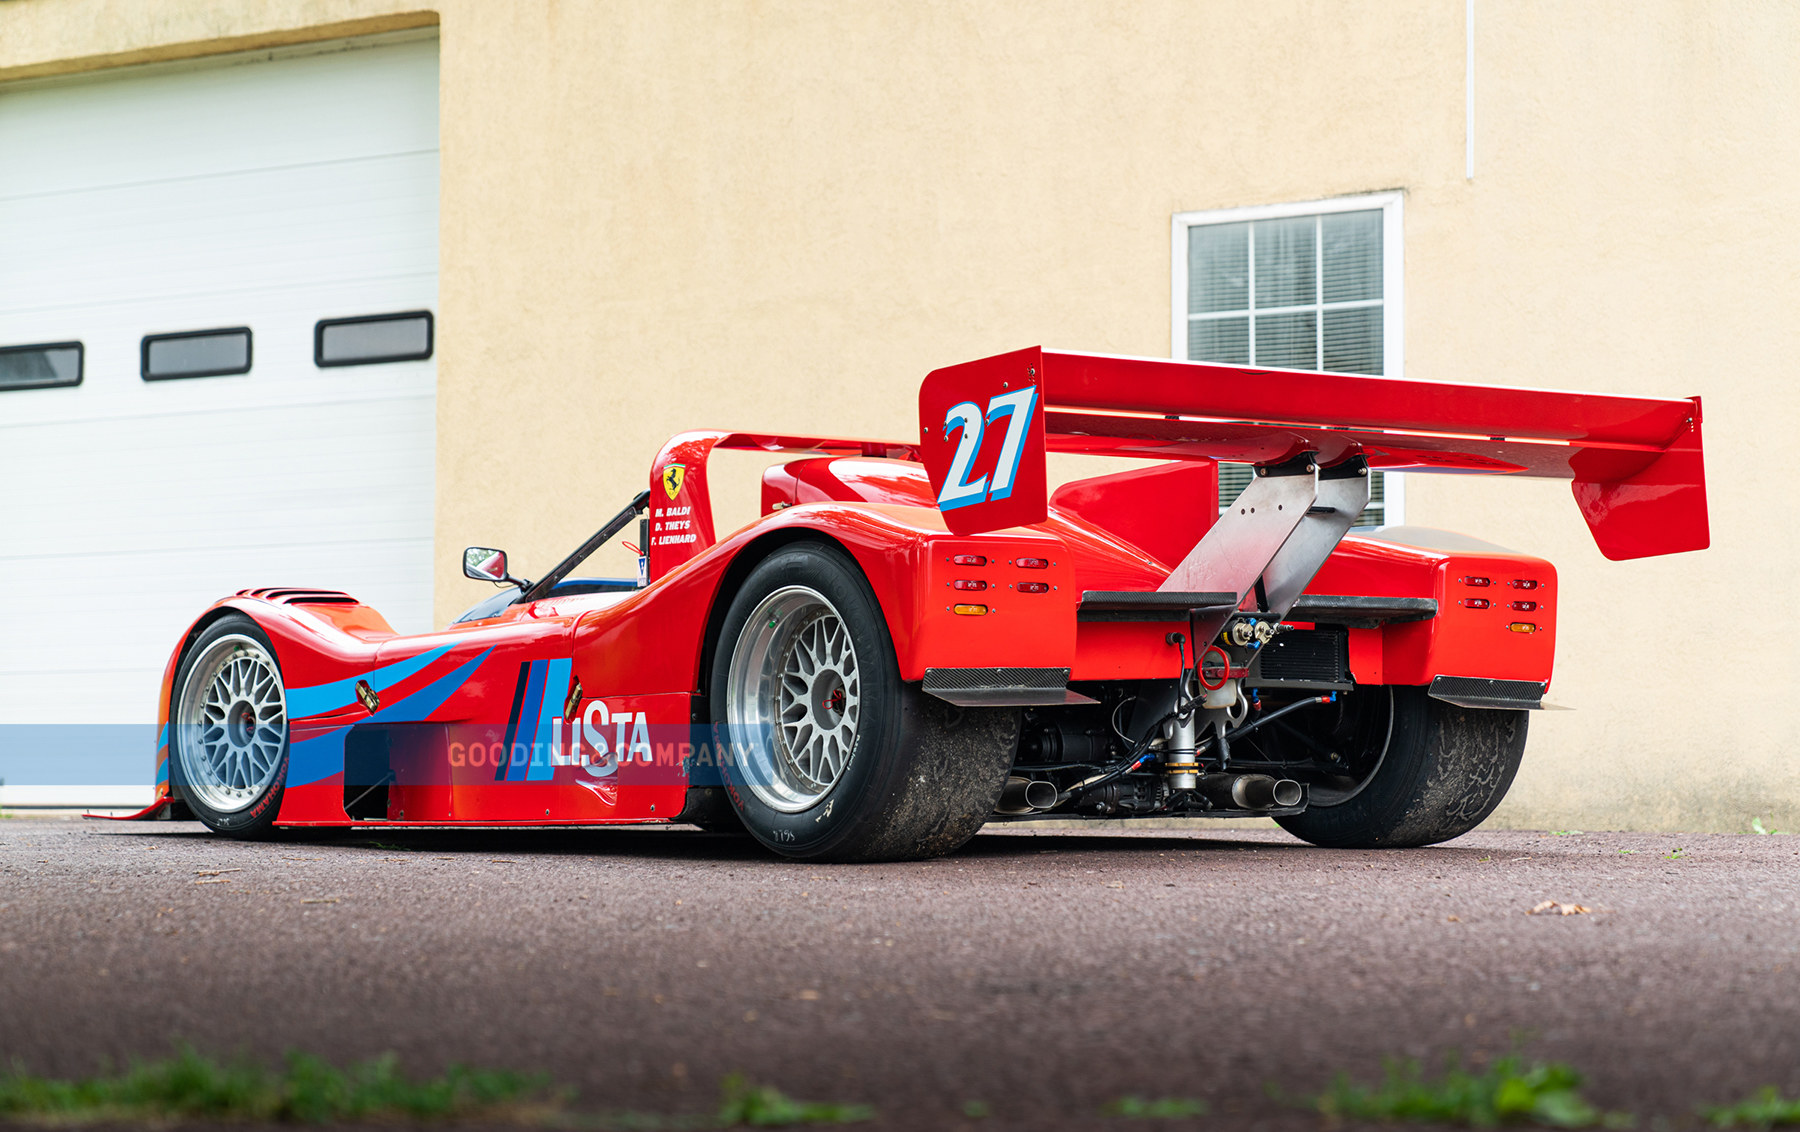 For sale at Gooding & Company Auction – Ferrari 333 SP | FCHGT